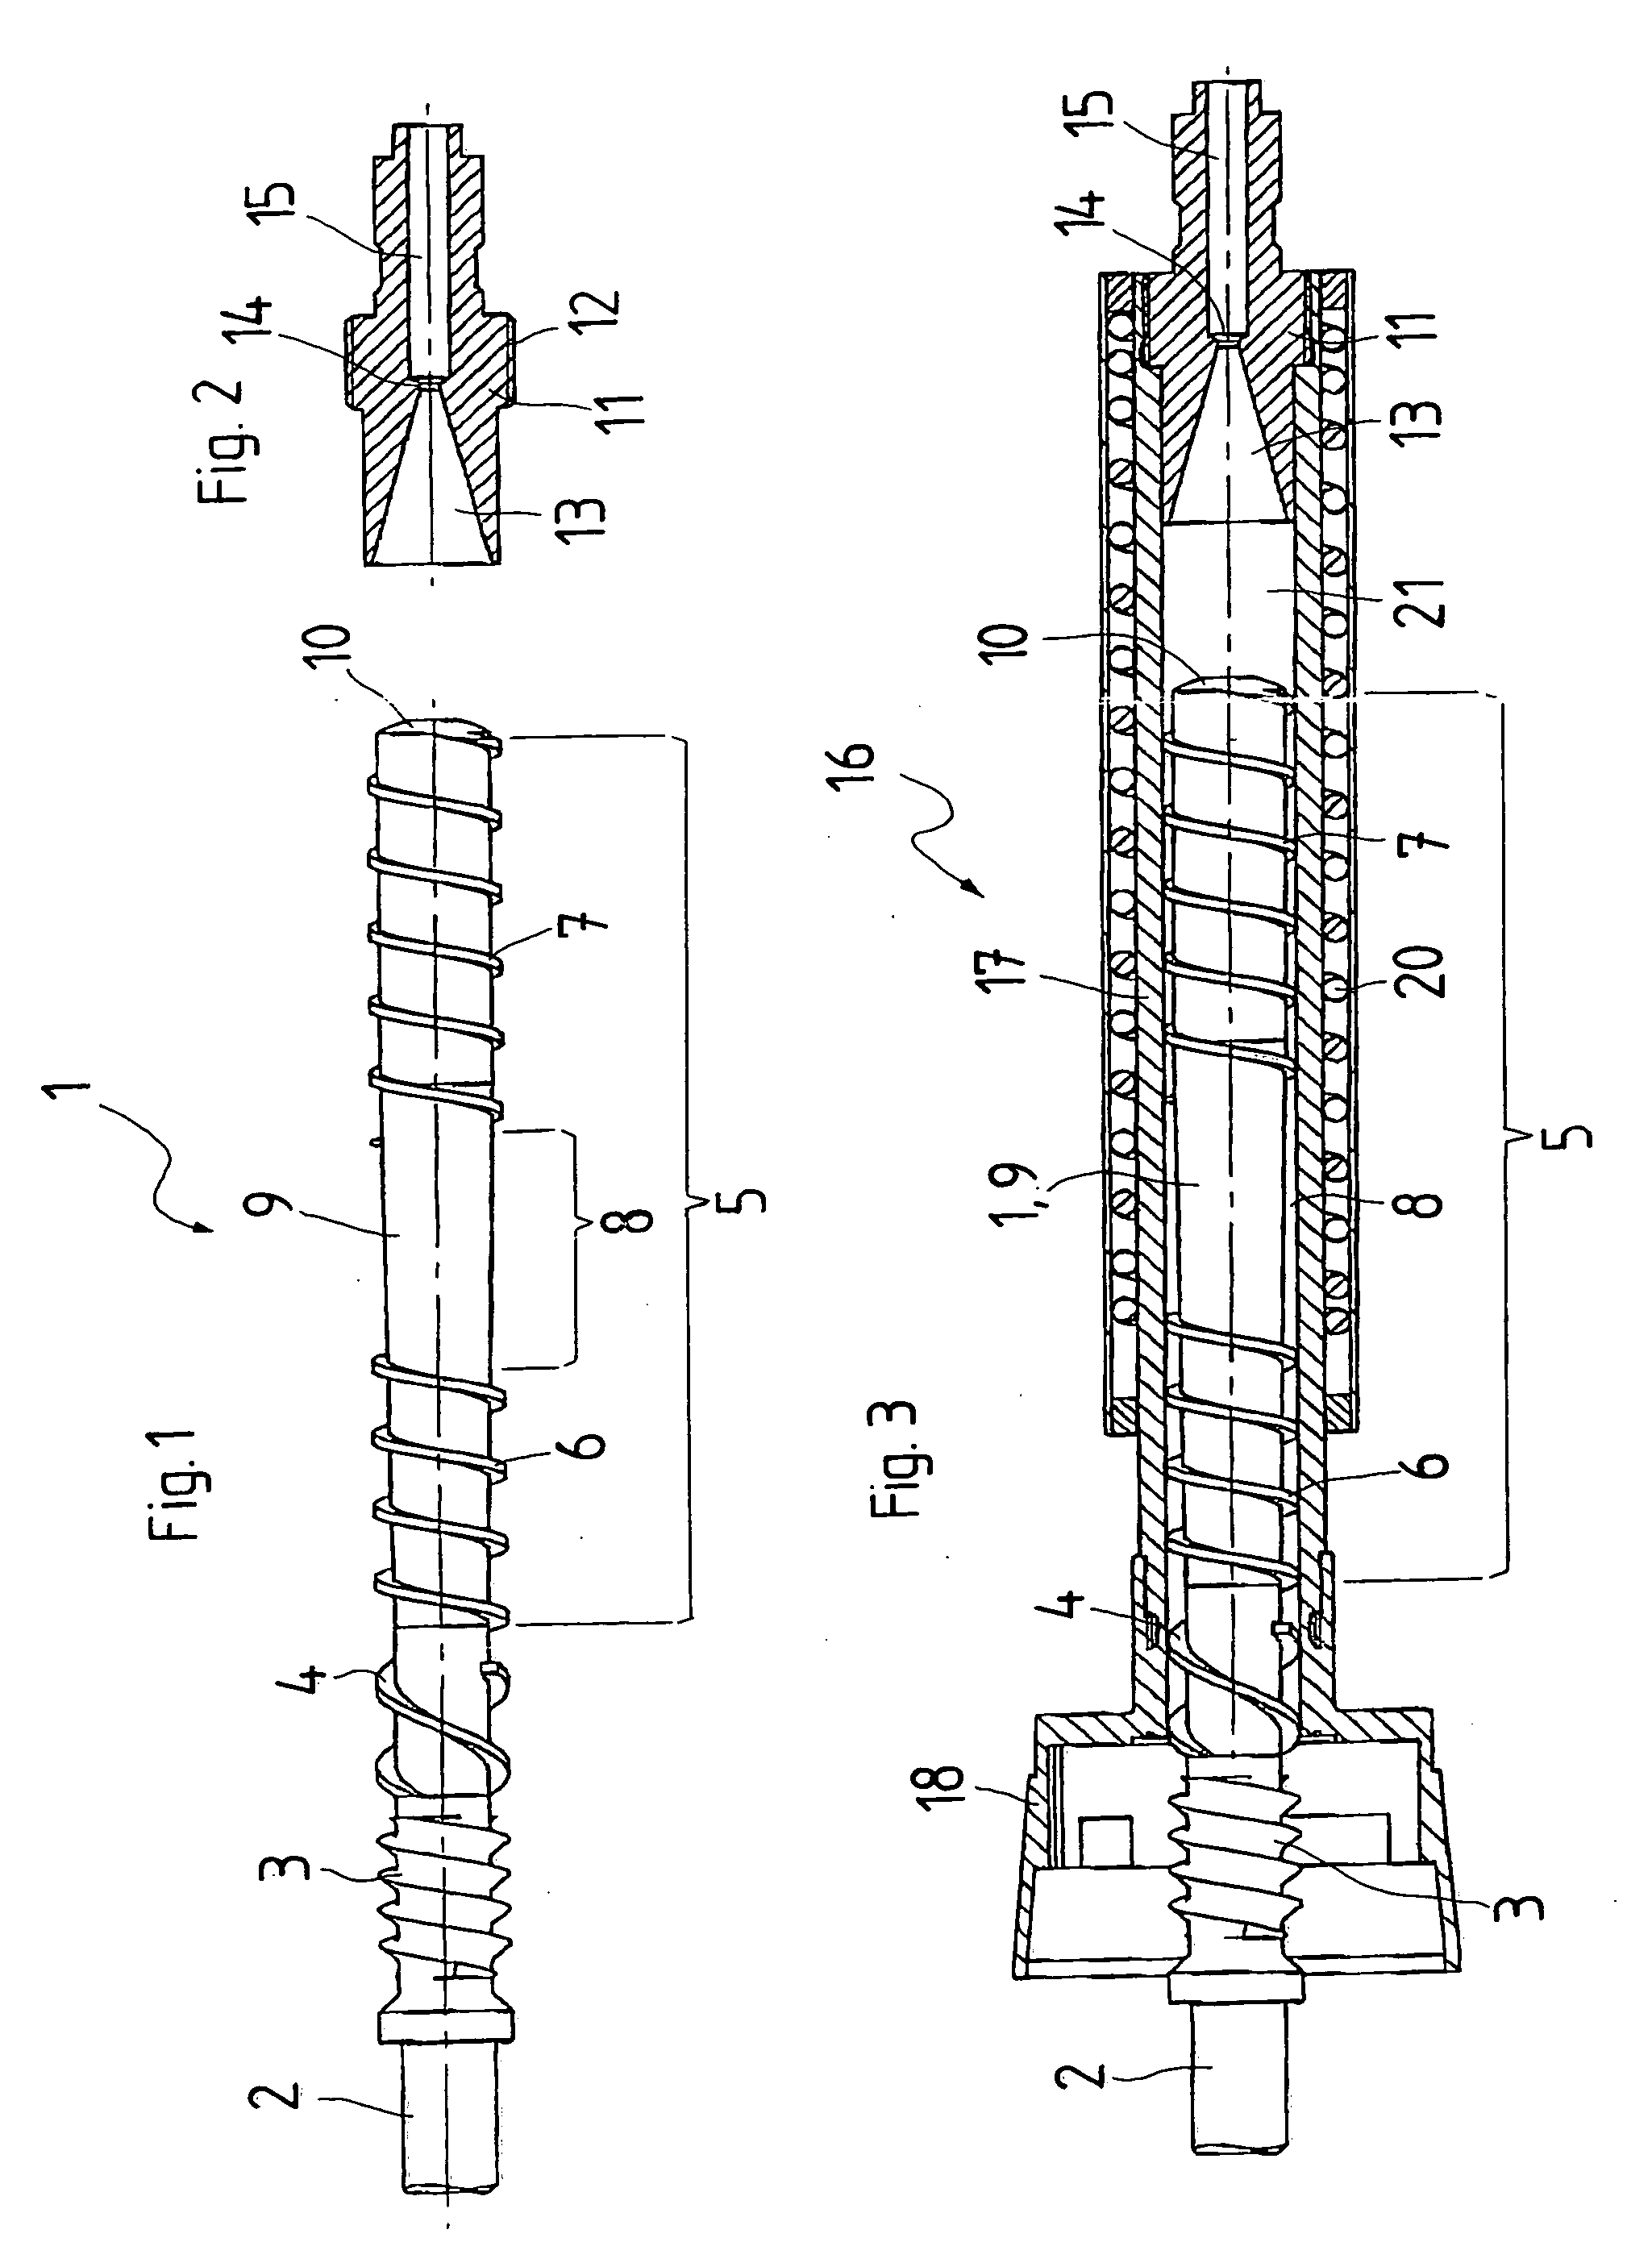 Extruder, specifically an extrusion welding device